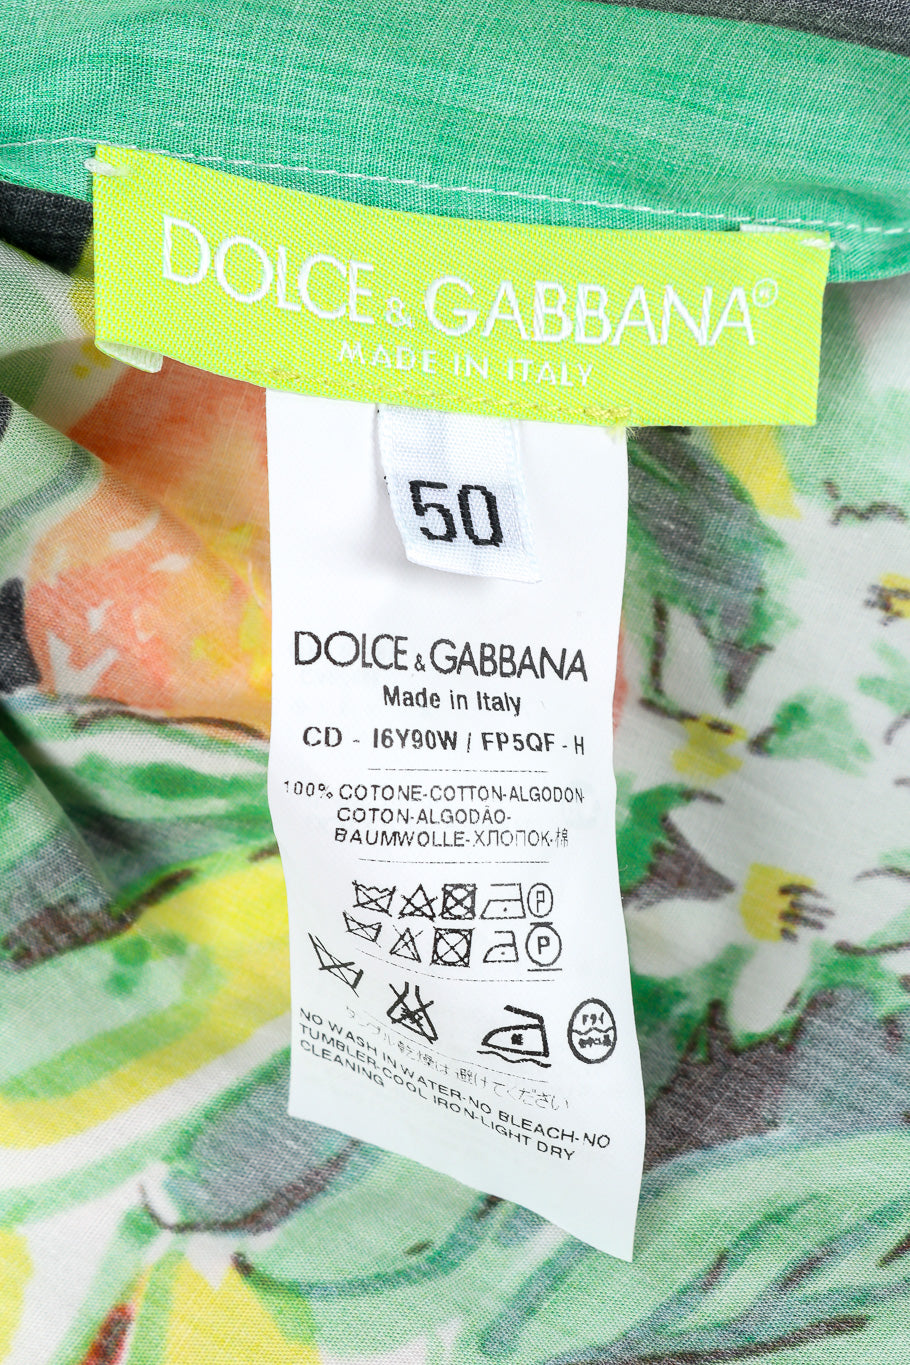 Dolce & Gabbana halter pleated dress designer tag, size and fabric content @recessla